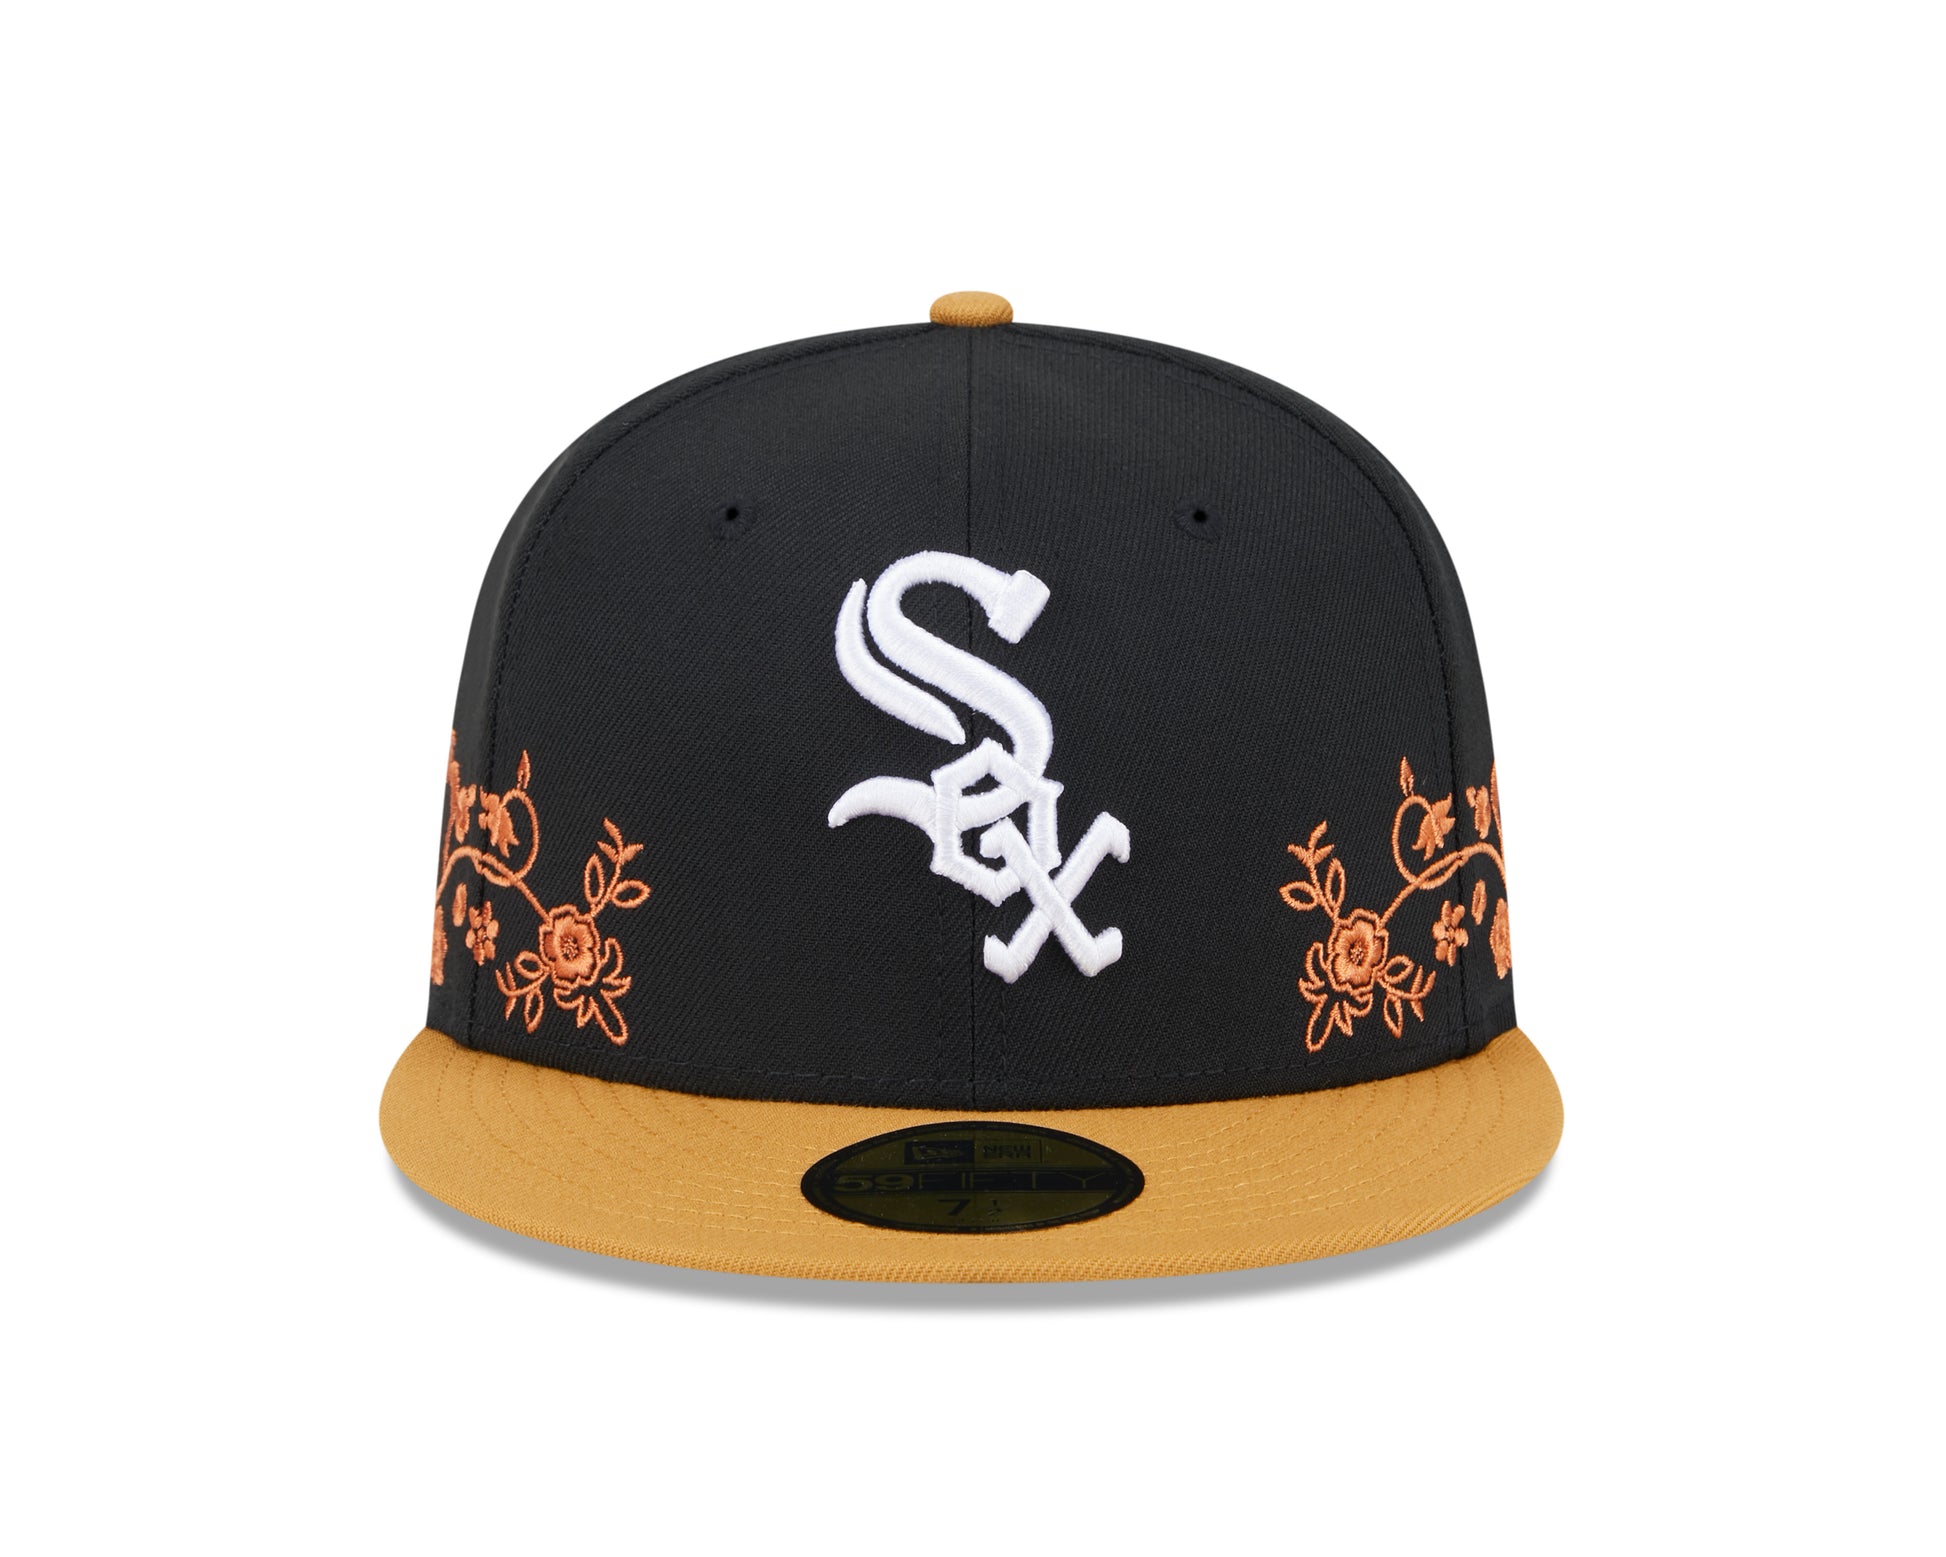 New Era - 59Fifty Fitted - FLORAL VINE - Chicago White Sox - Black - Headz Up 